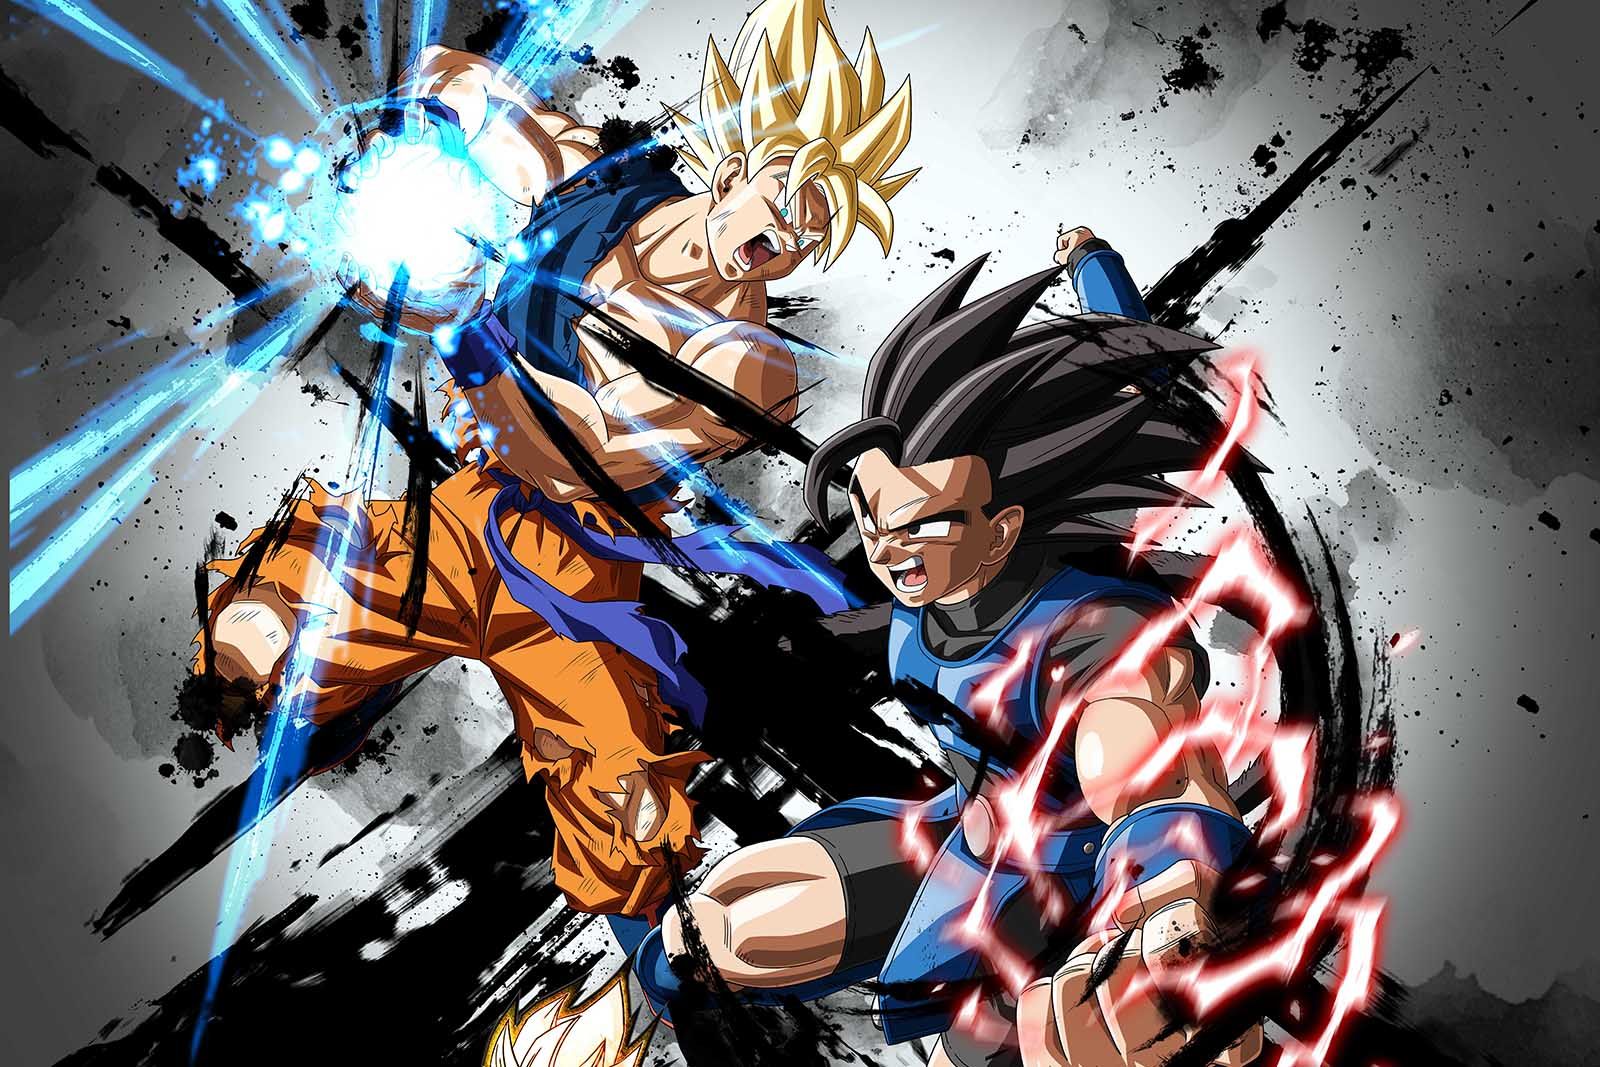 Bandai Namco 2018 mobile game line-up Here are the trailers of Dragon Ball Legends and more image 1